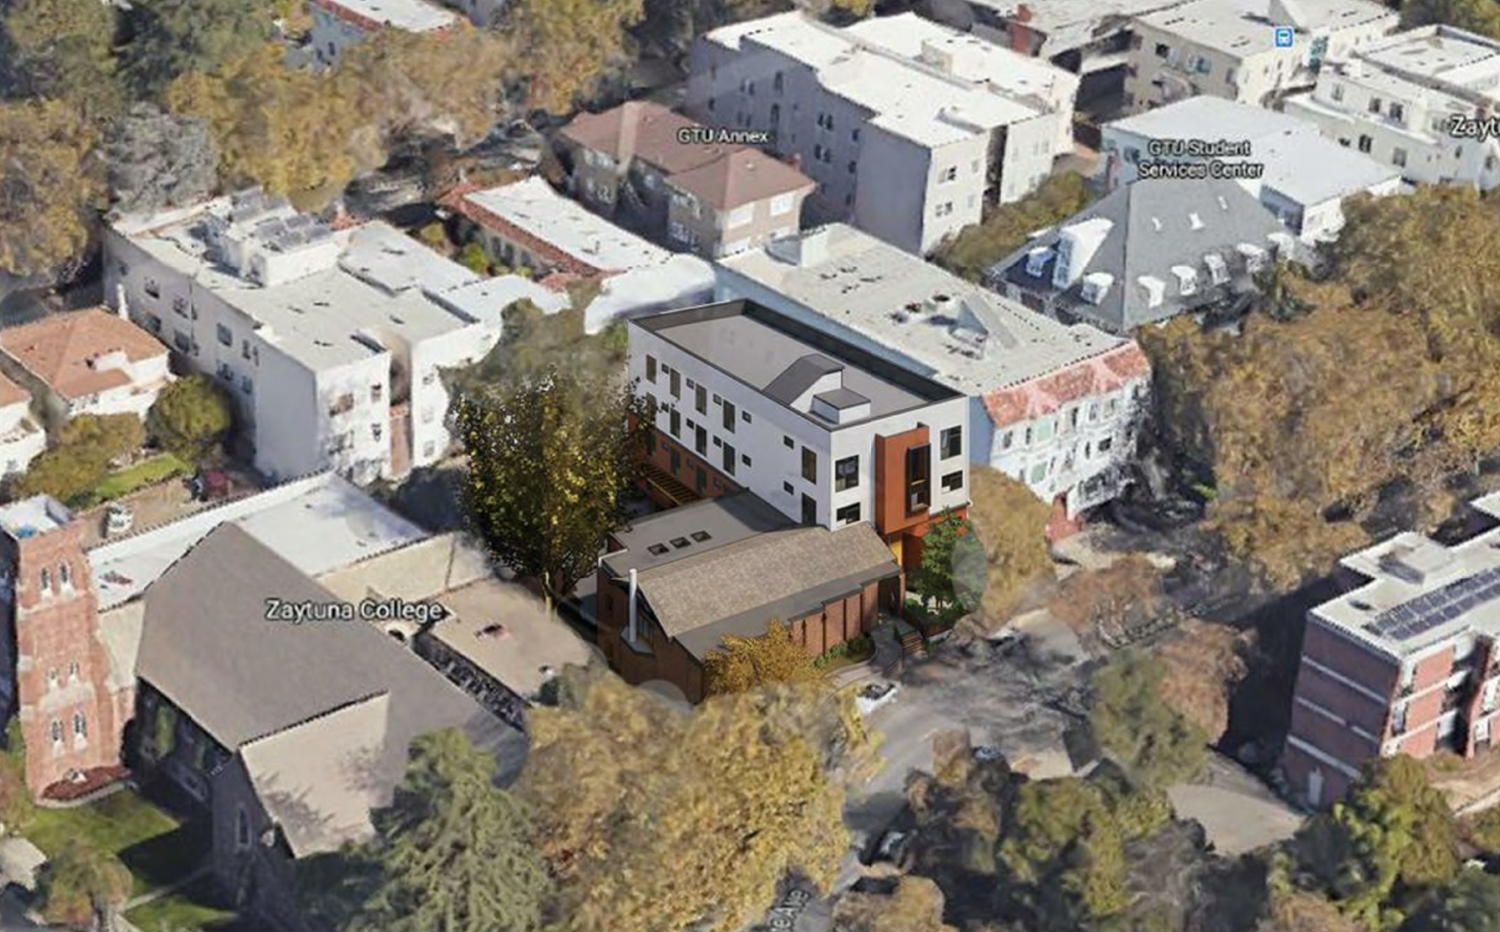 2441 Le Conte Avenue aerial view showing the previous design iteration, rendering by Studio KDA